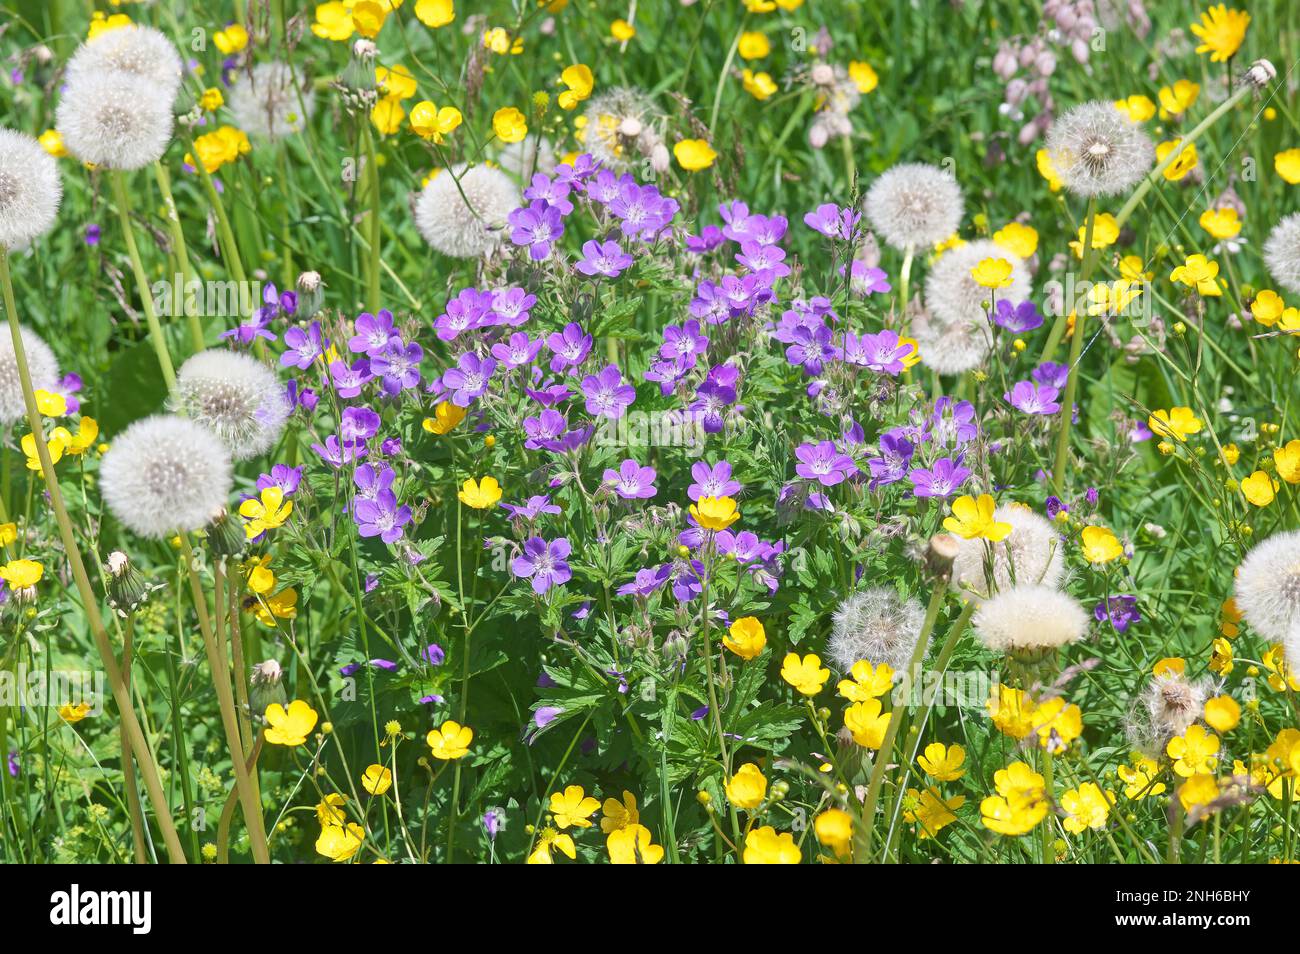 Alpine meadow at middle hight (1500 m) in flowers with dandelion seedheads (Taraxum officinale), wood-buutercups (Ranunculus nemorosus) and wood-crane Stock Photo